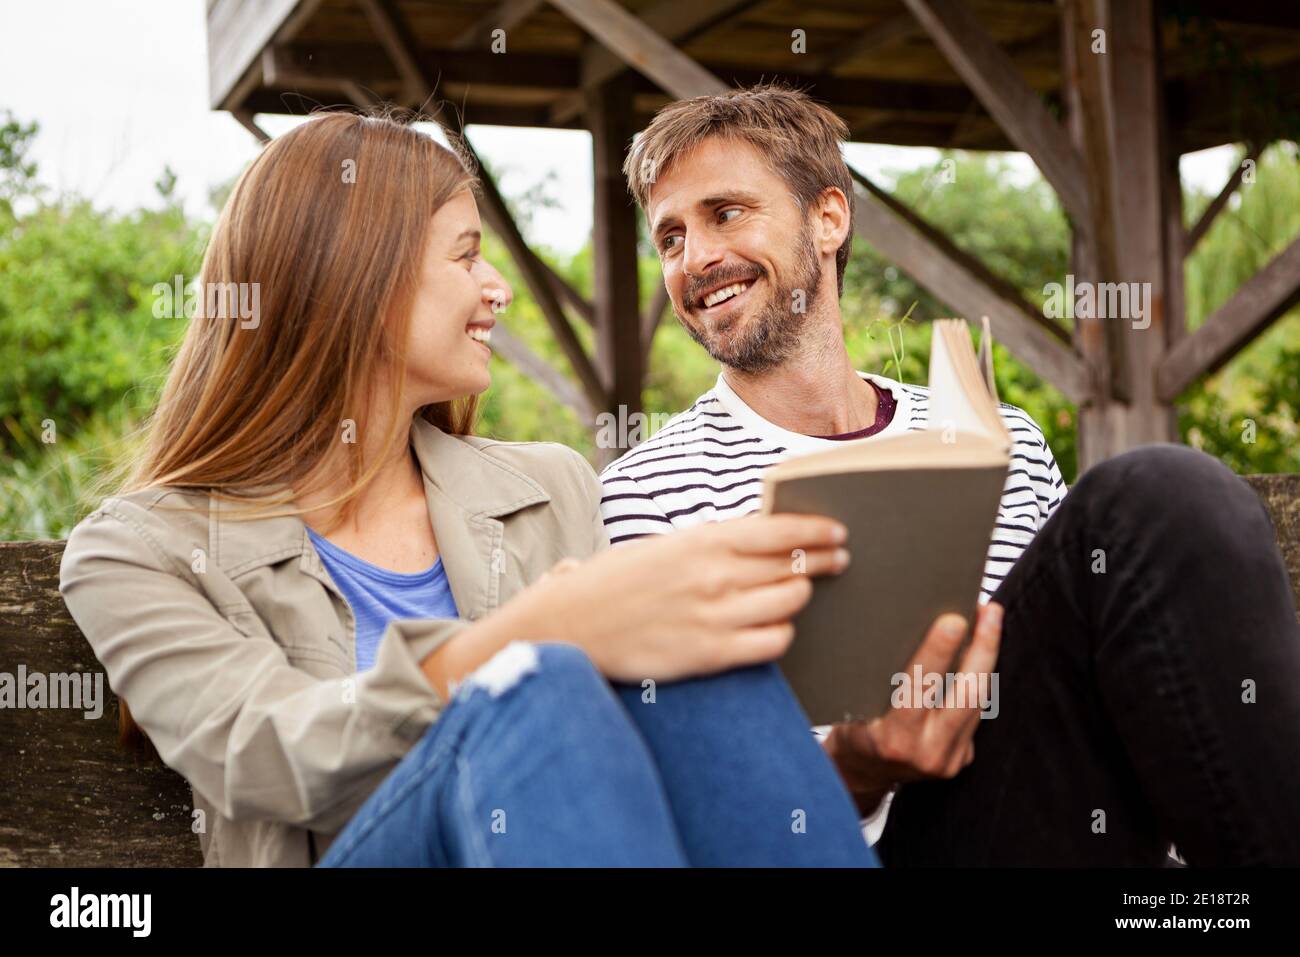 Couple sitting with book on bench Stock Photo